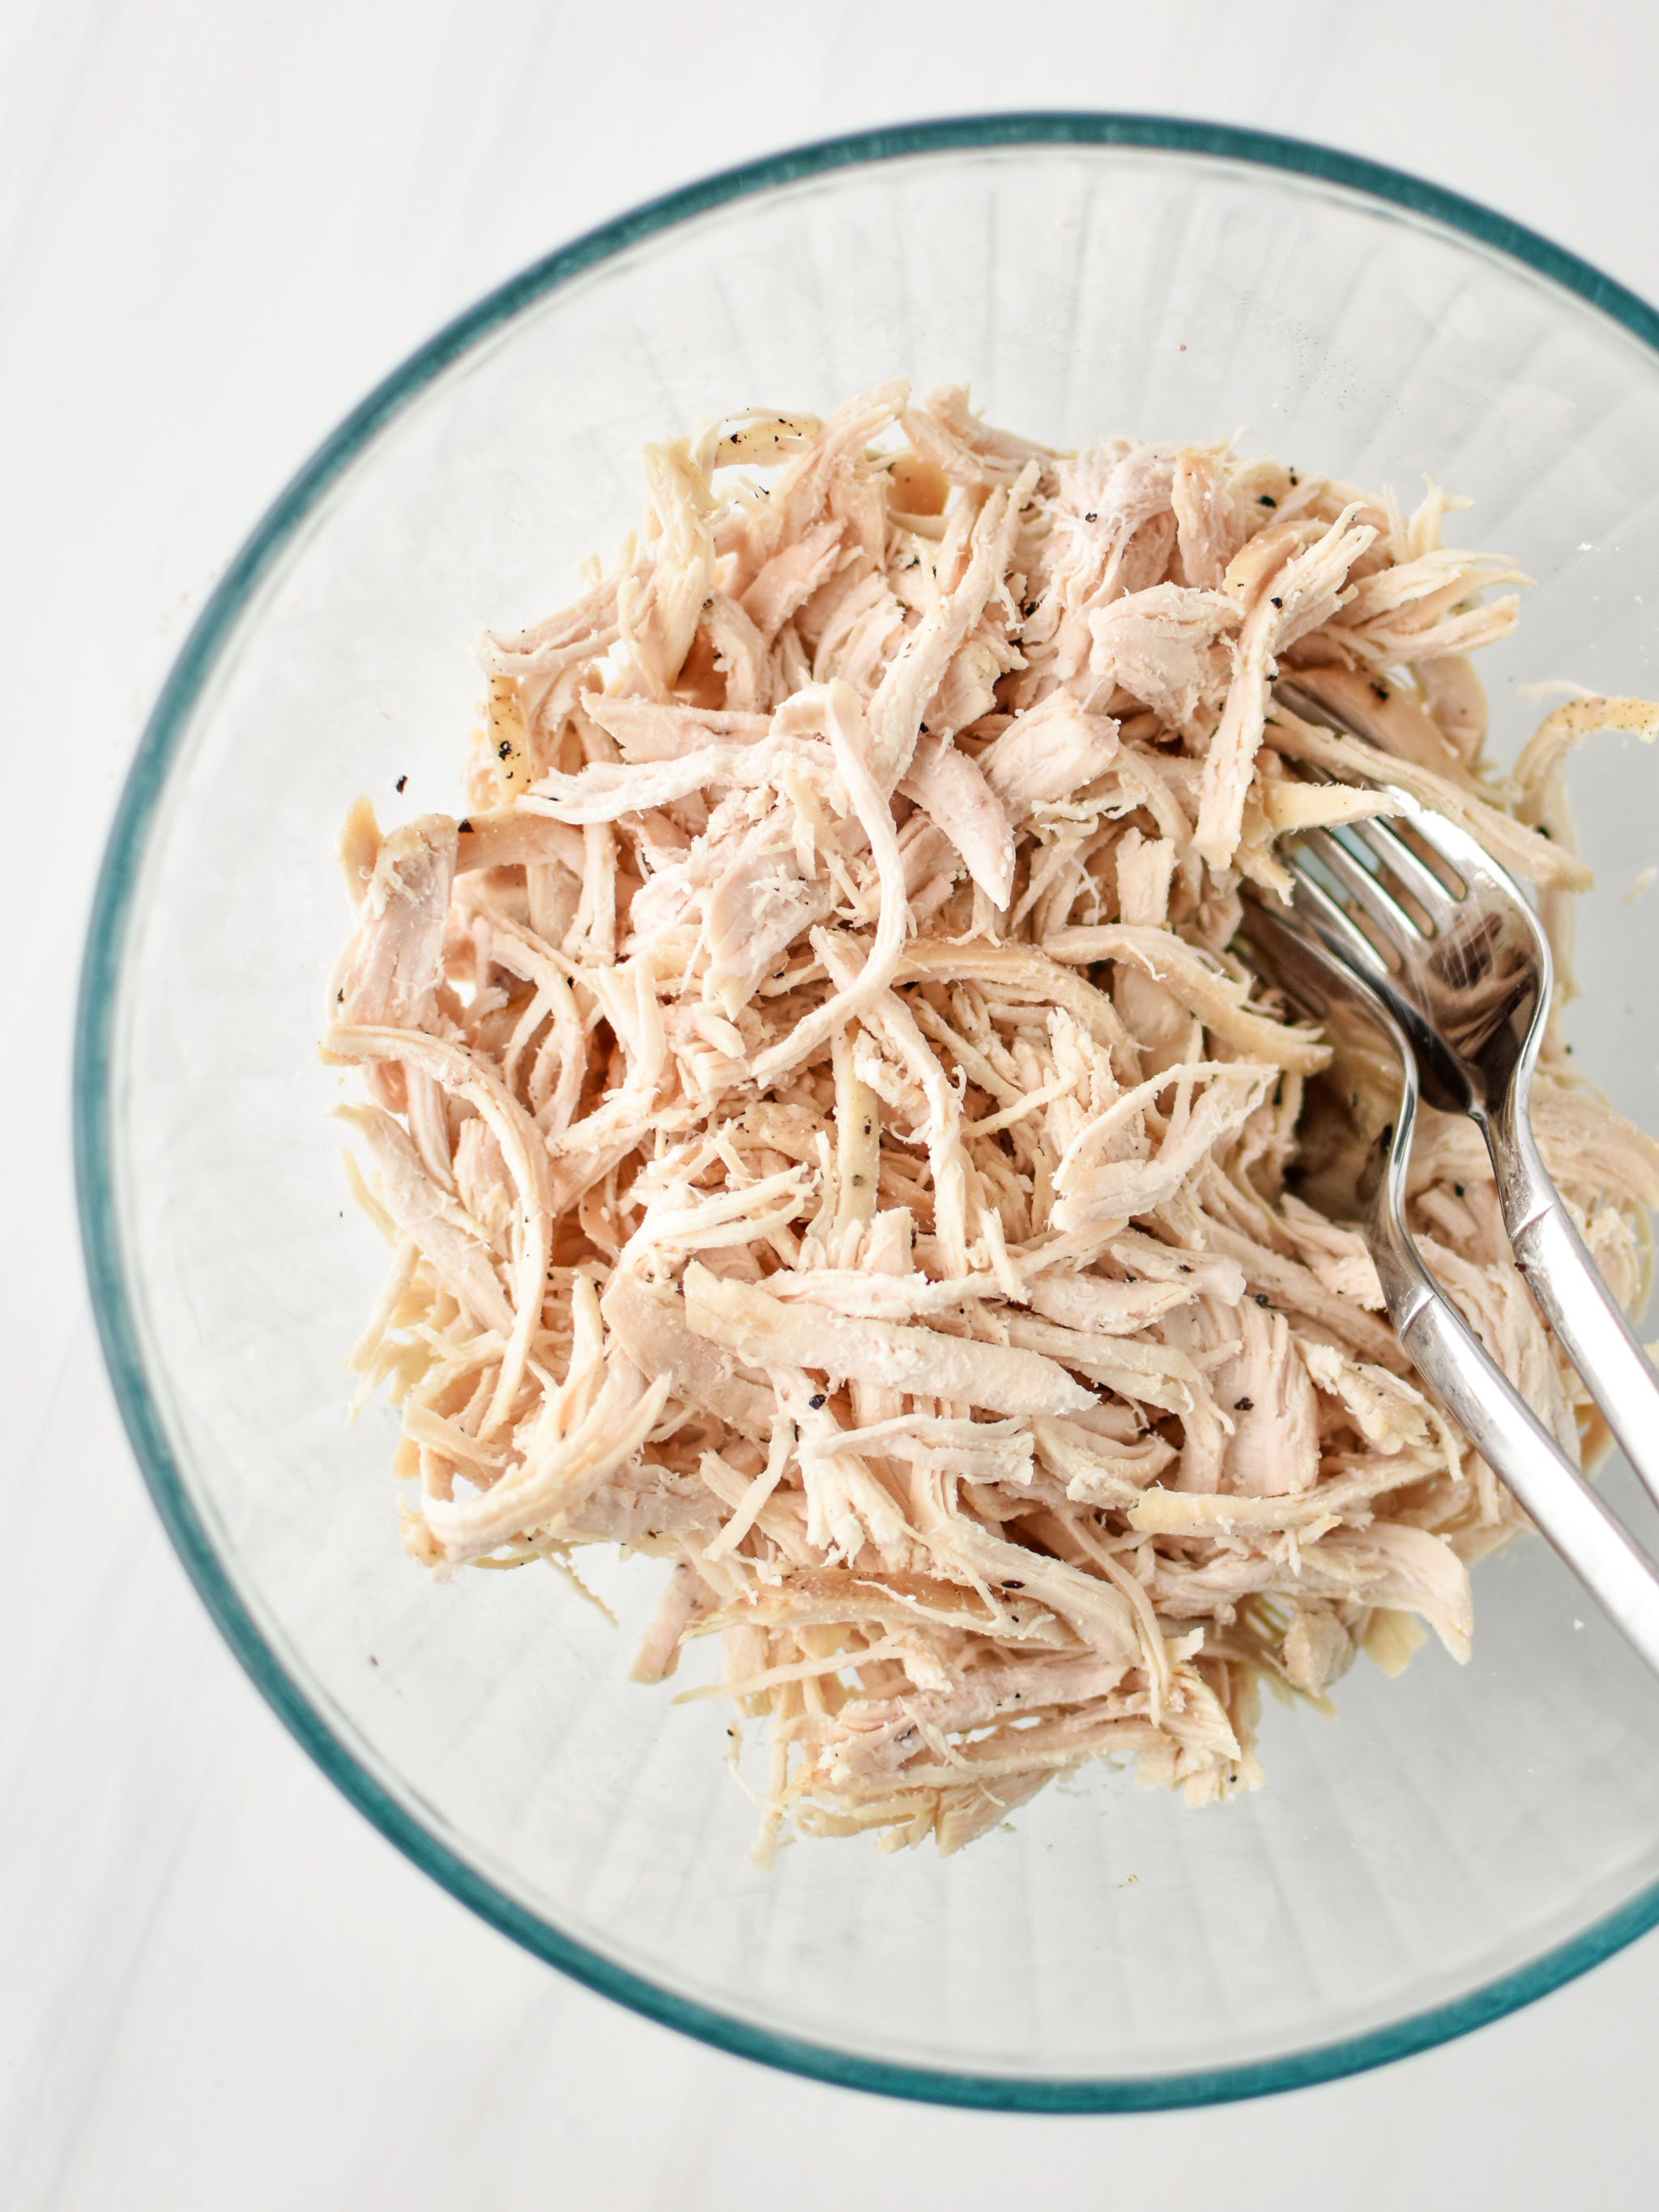 Shredded chicken in a bowl for the Easy Buffalo Chicken Salad